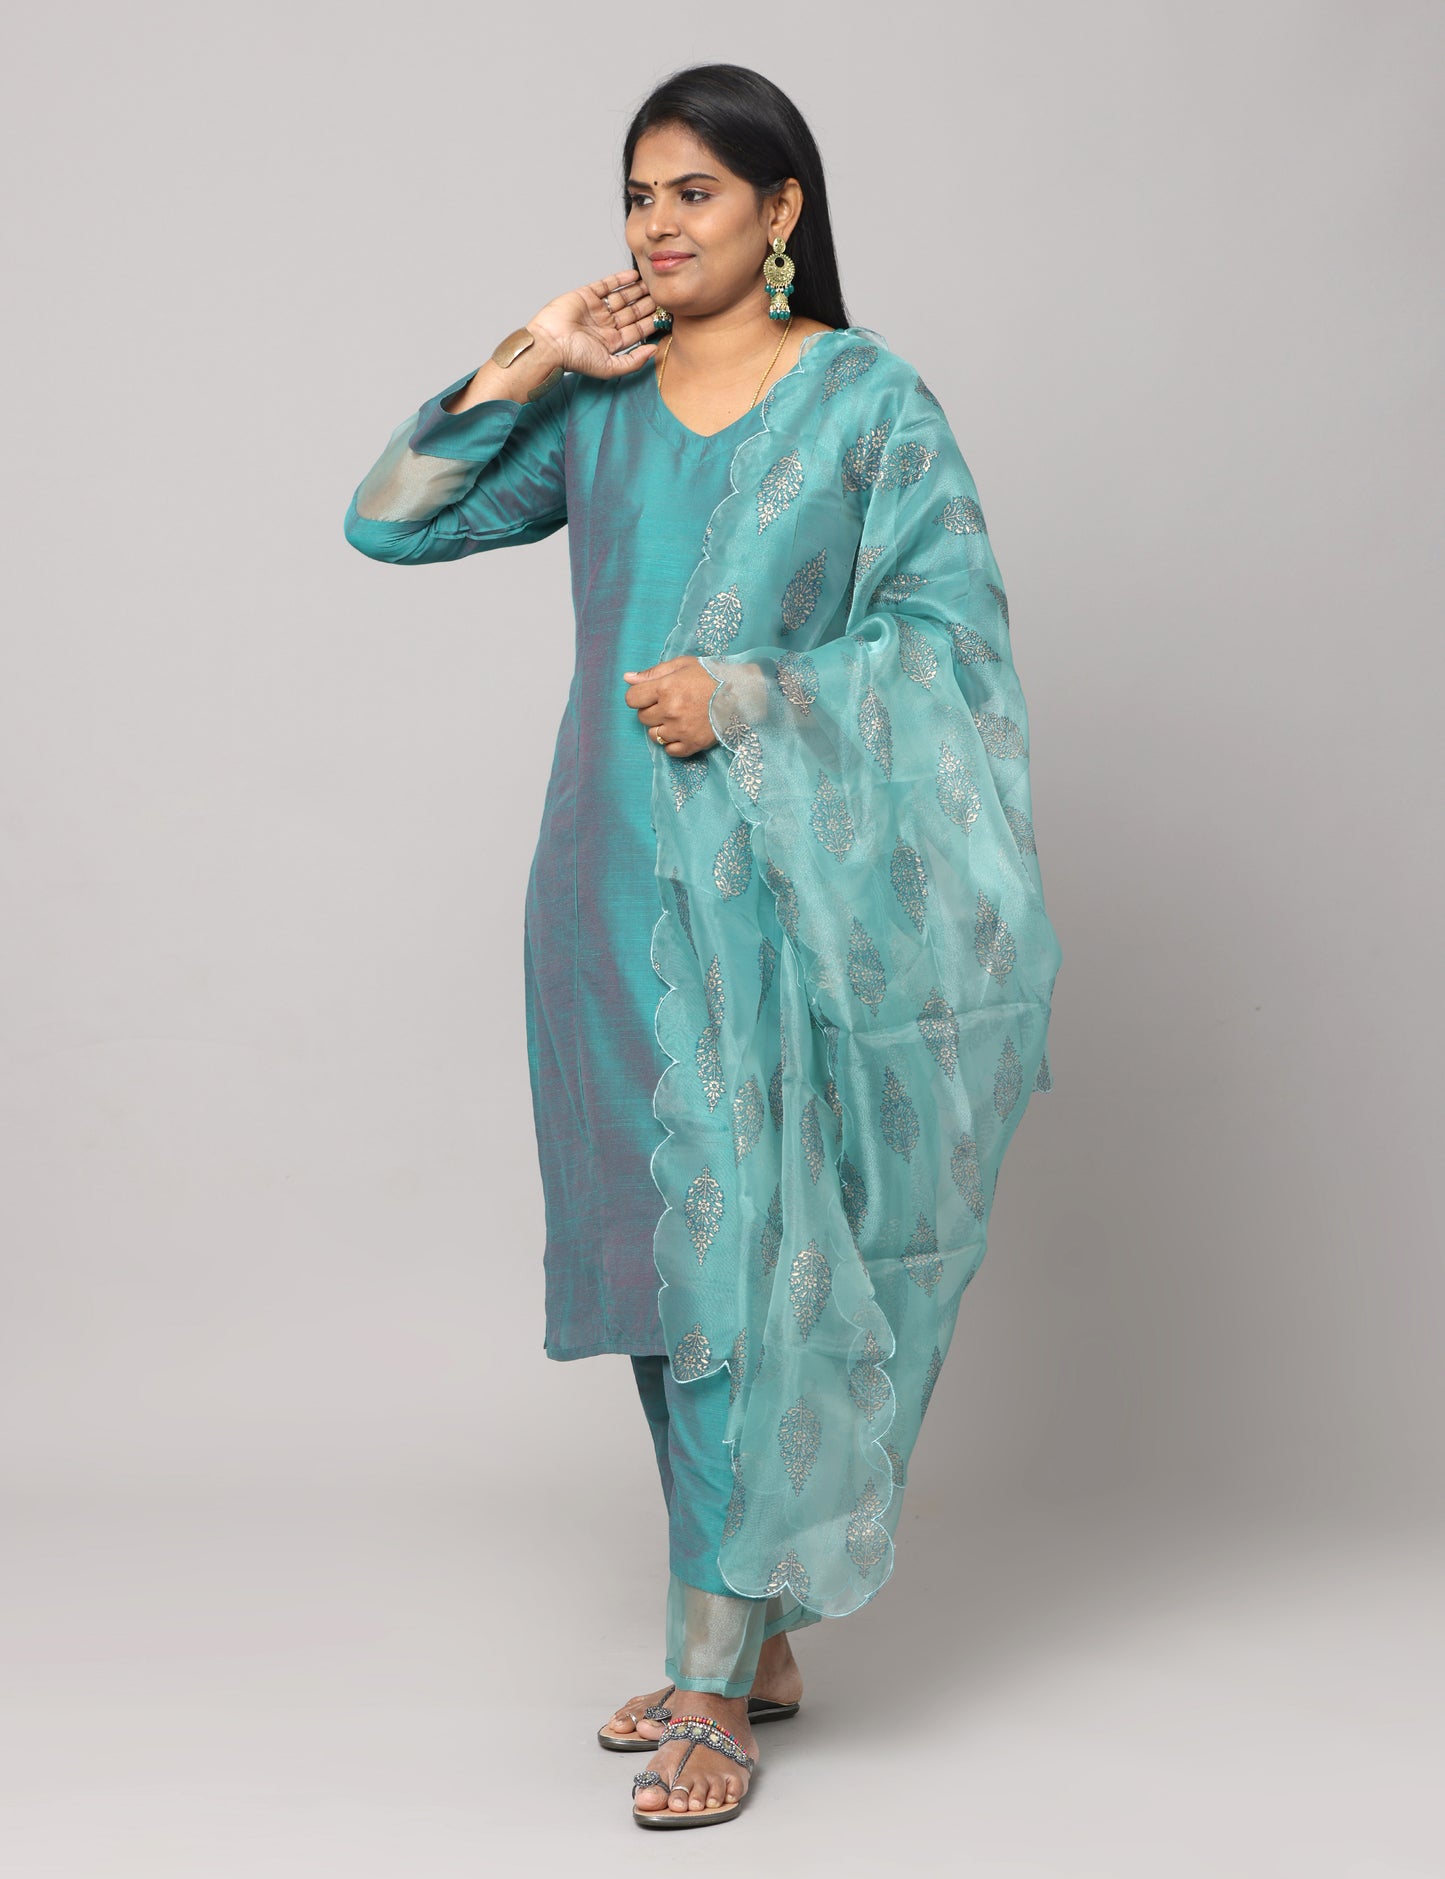 Rama silk cotton coord set (DUPATTA NOT INCLUDED)